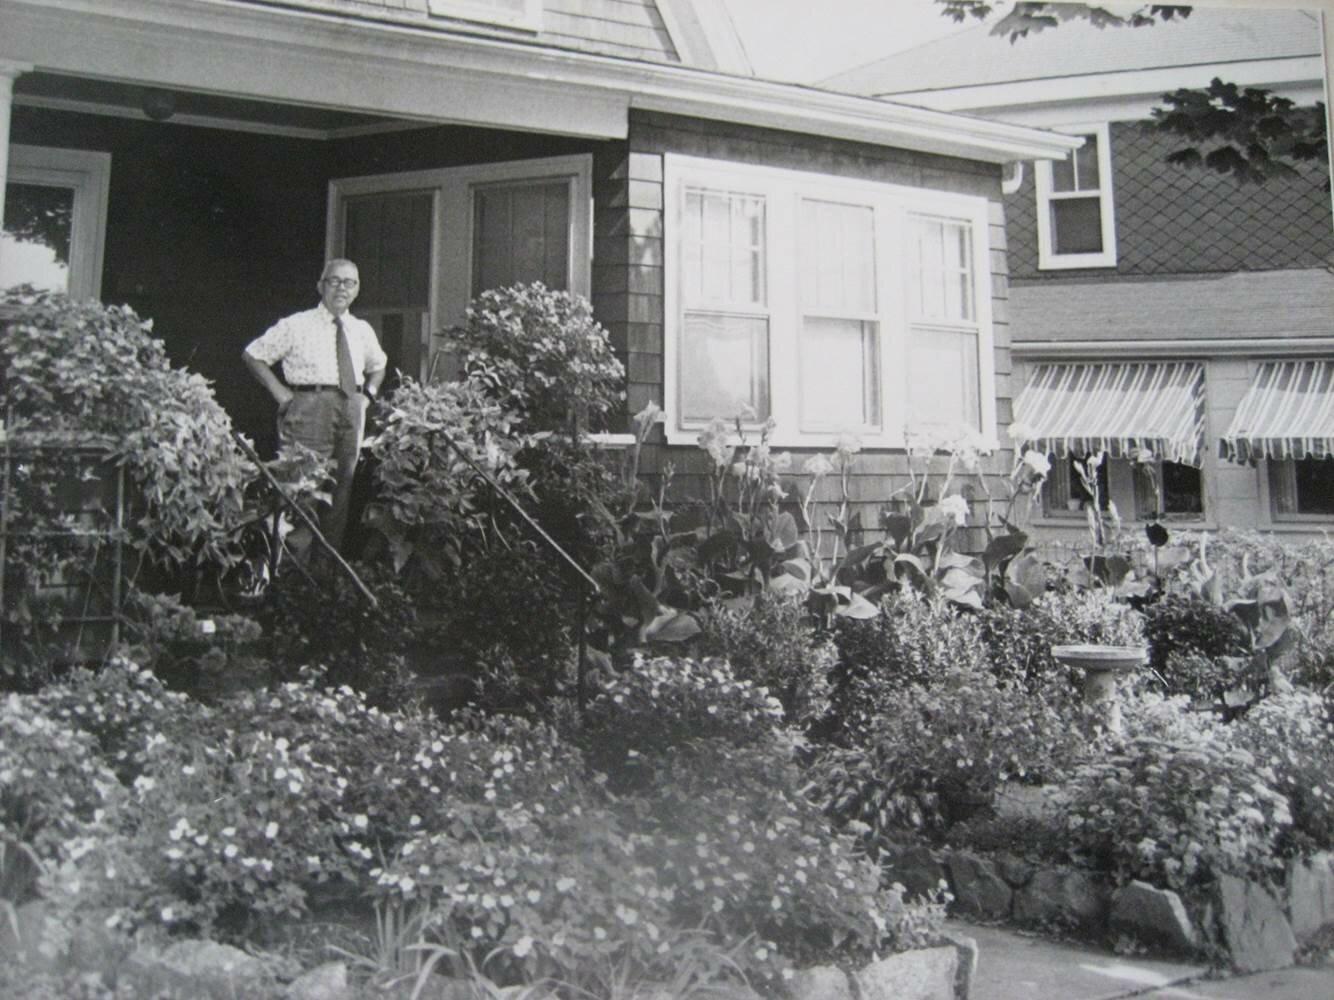 Frank Albano, in front of his garden.